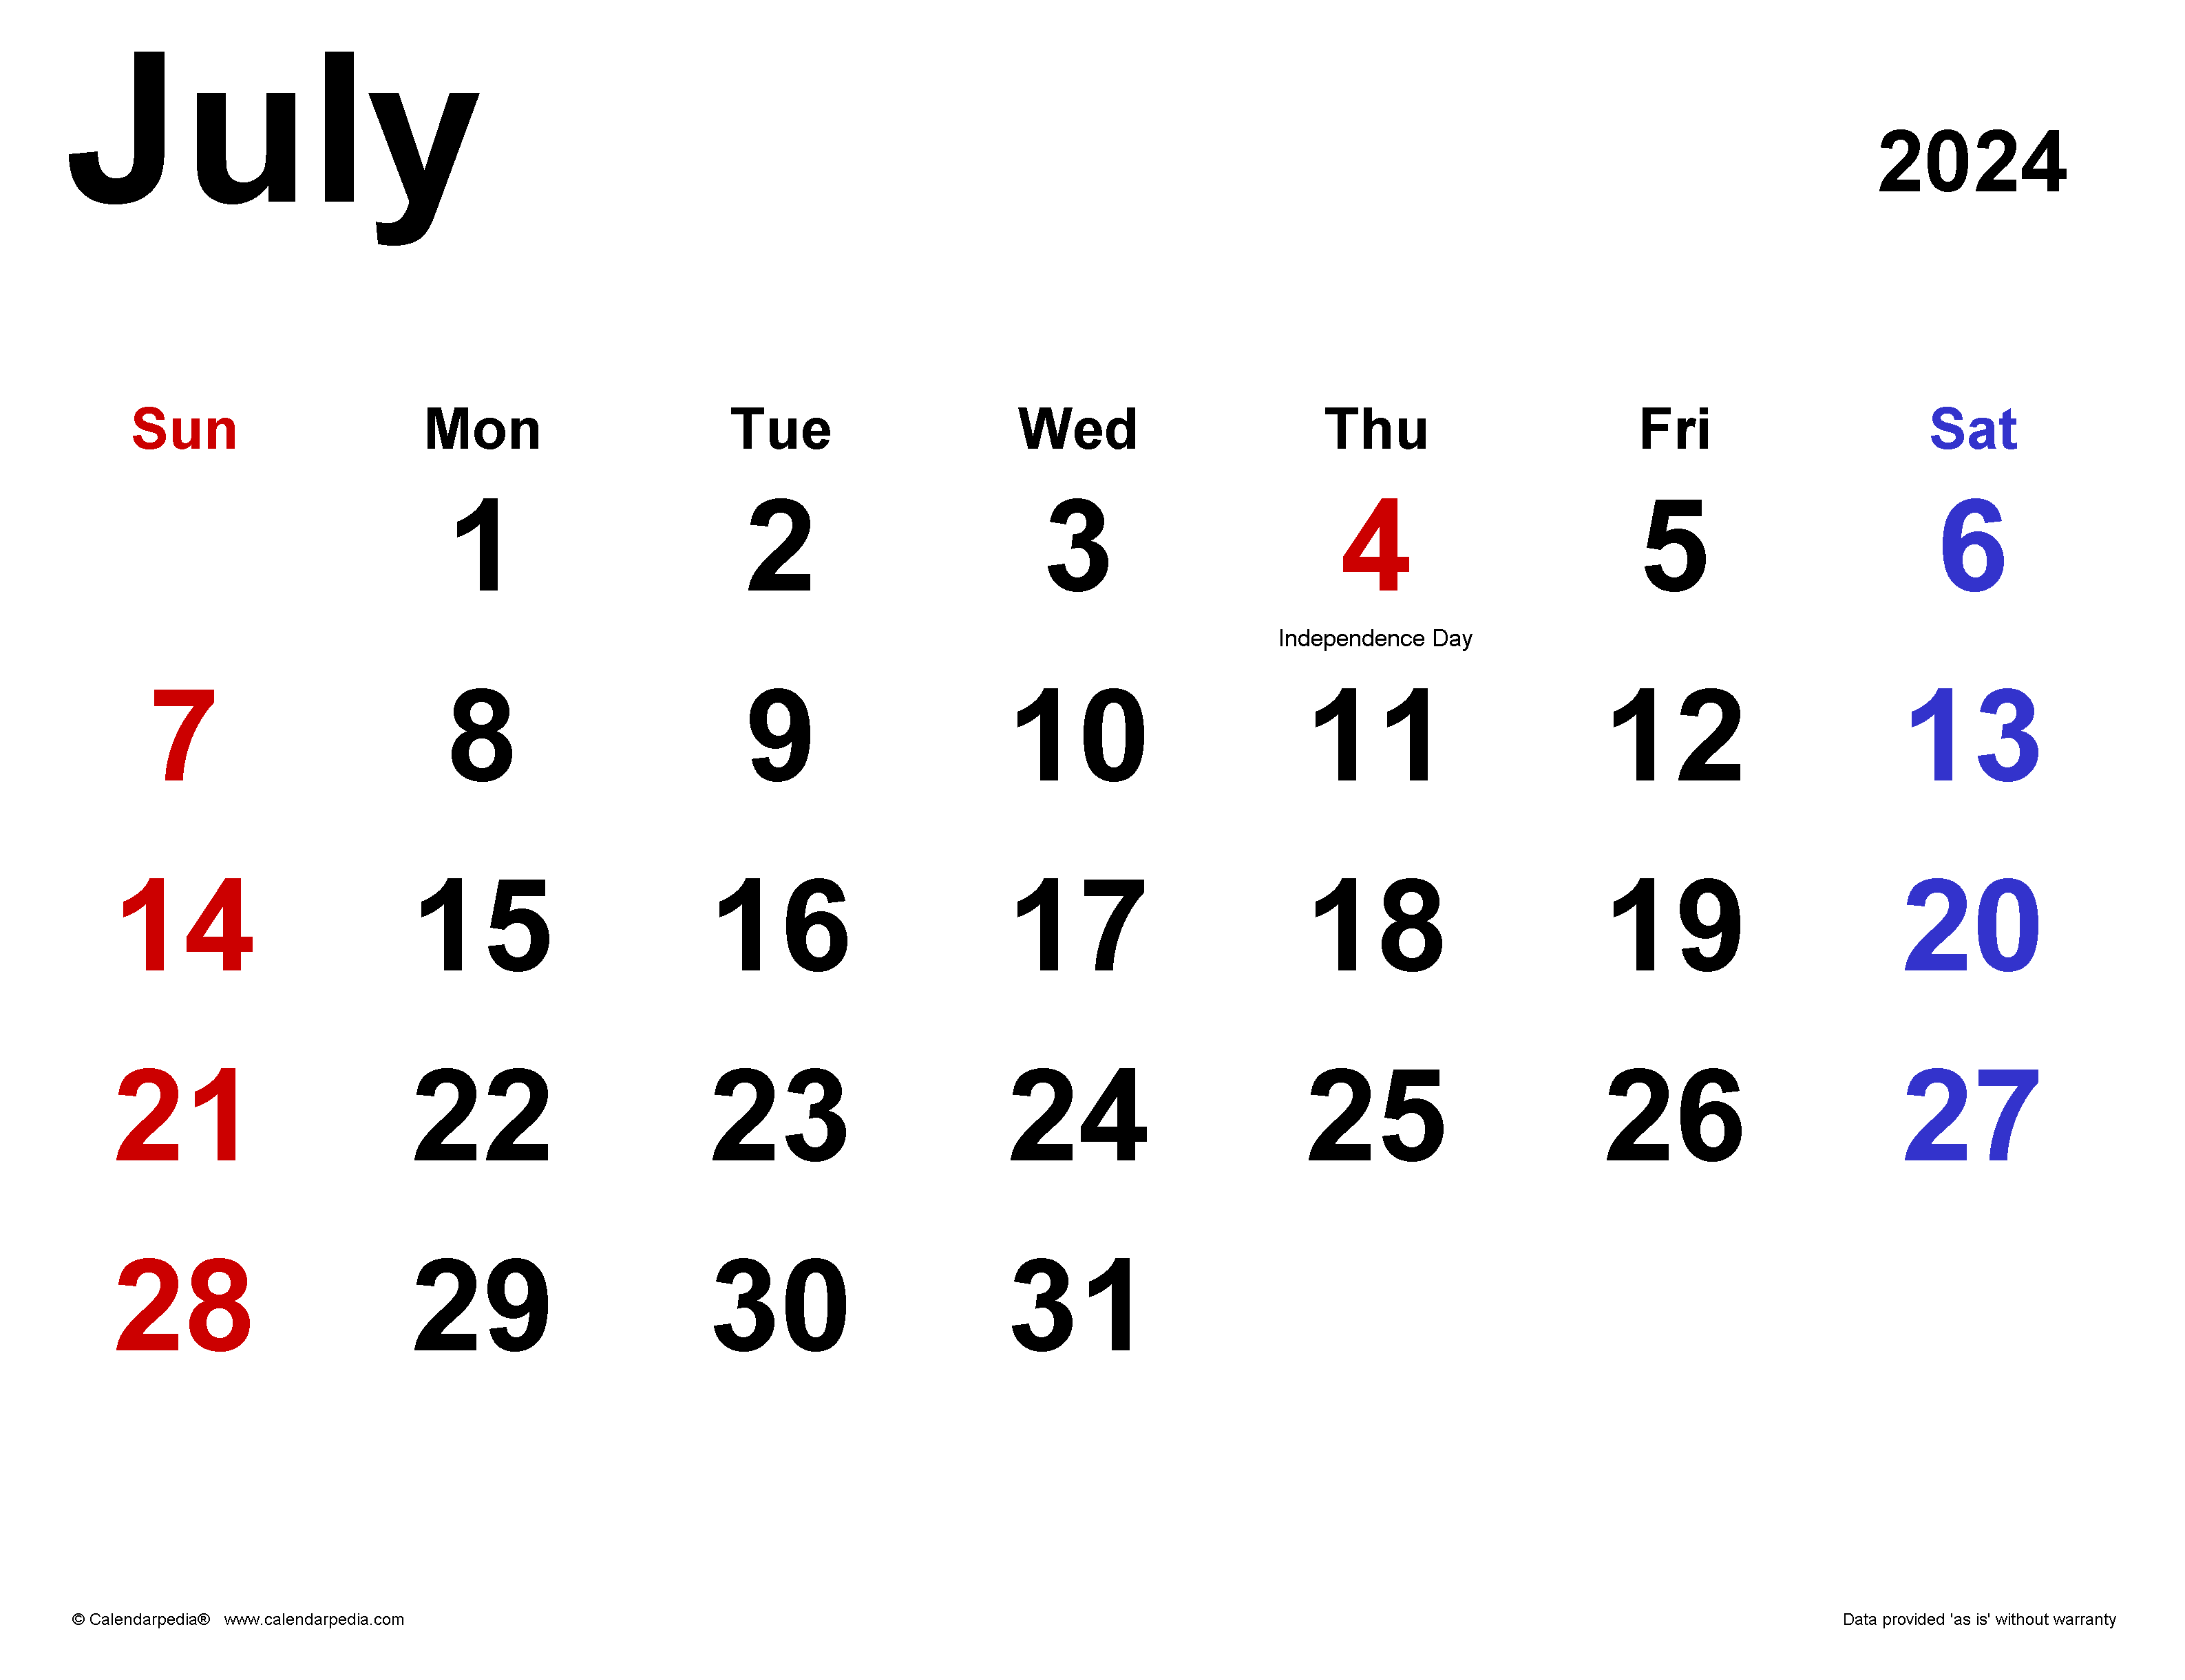 July 2024 Calendar | Templates For Word, Excel And Pdf regarding 2 Month Wall Calendar Starting July 2024